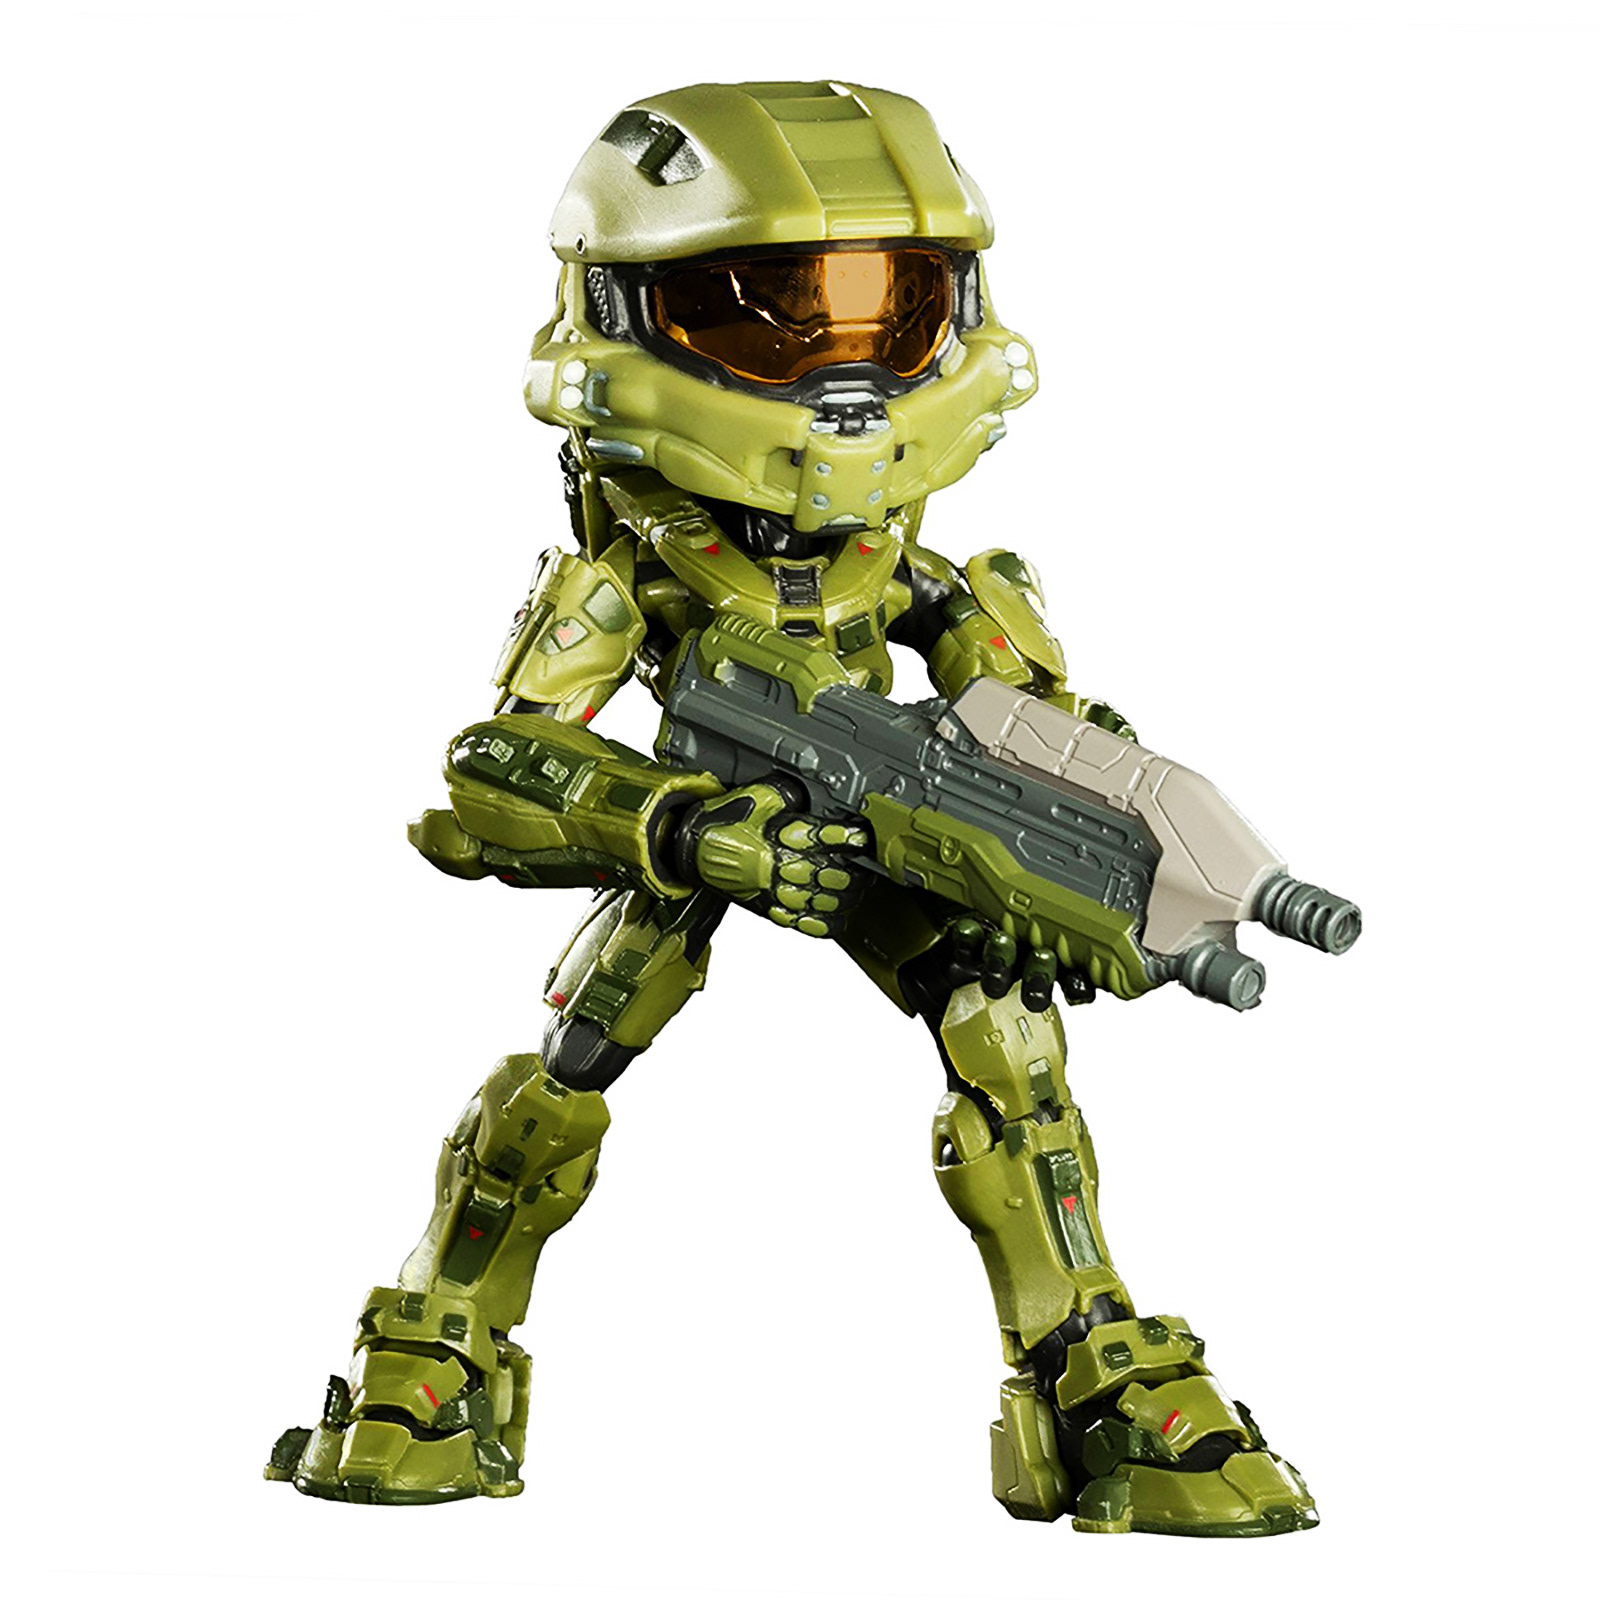 The 12 Days of Halo Toy Reviews: Day 6 Jinx Master Chief Figure